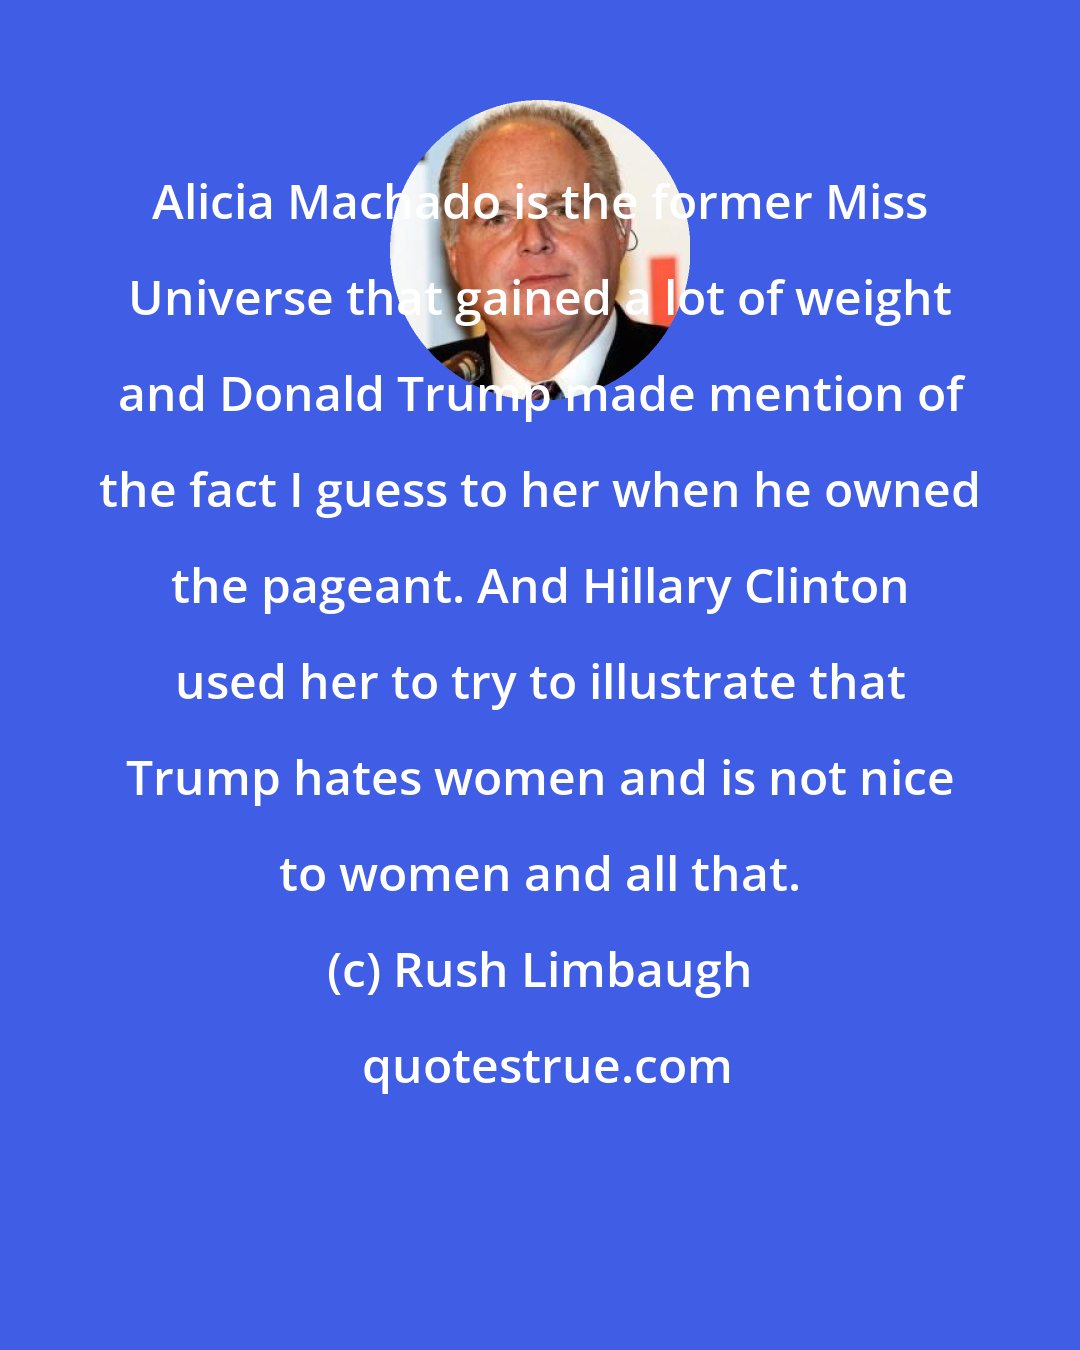 Rush Limbaugh: Alicia Machado is the former Miss Universe that gained a lot of weight and Donald Trump made mention of the fact I guess to her when he owned the pageant. And Hillary Clinton used her to try to illustrate that Trump hates women and is not nice to women and all that.